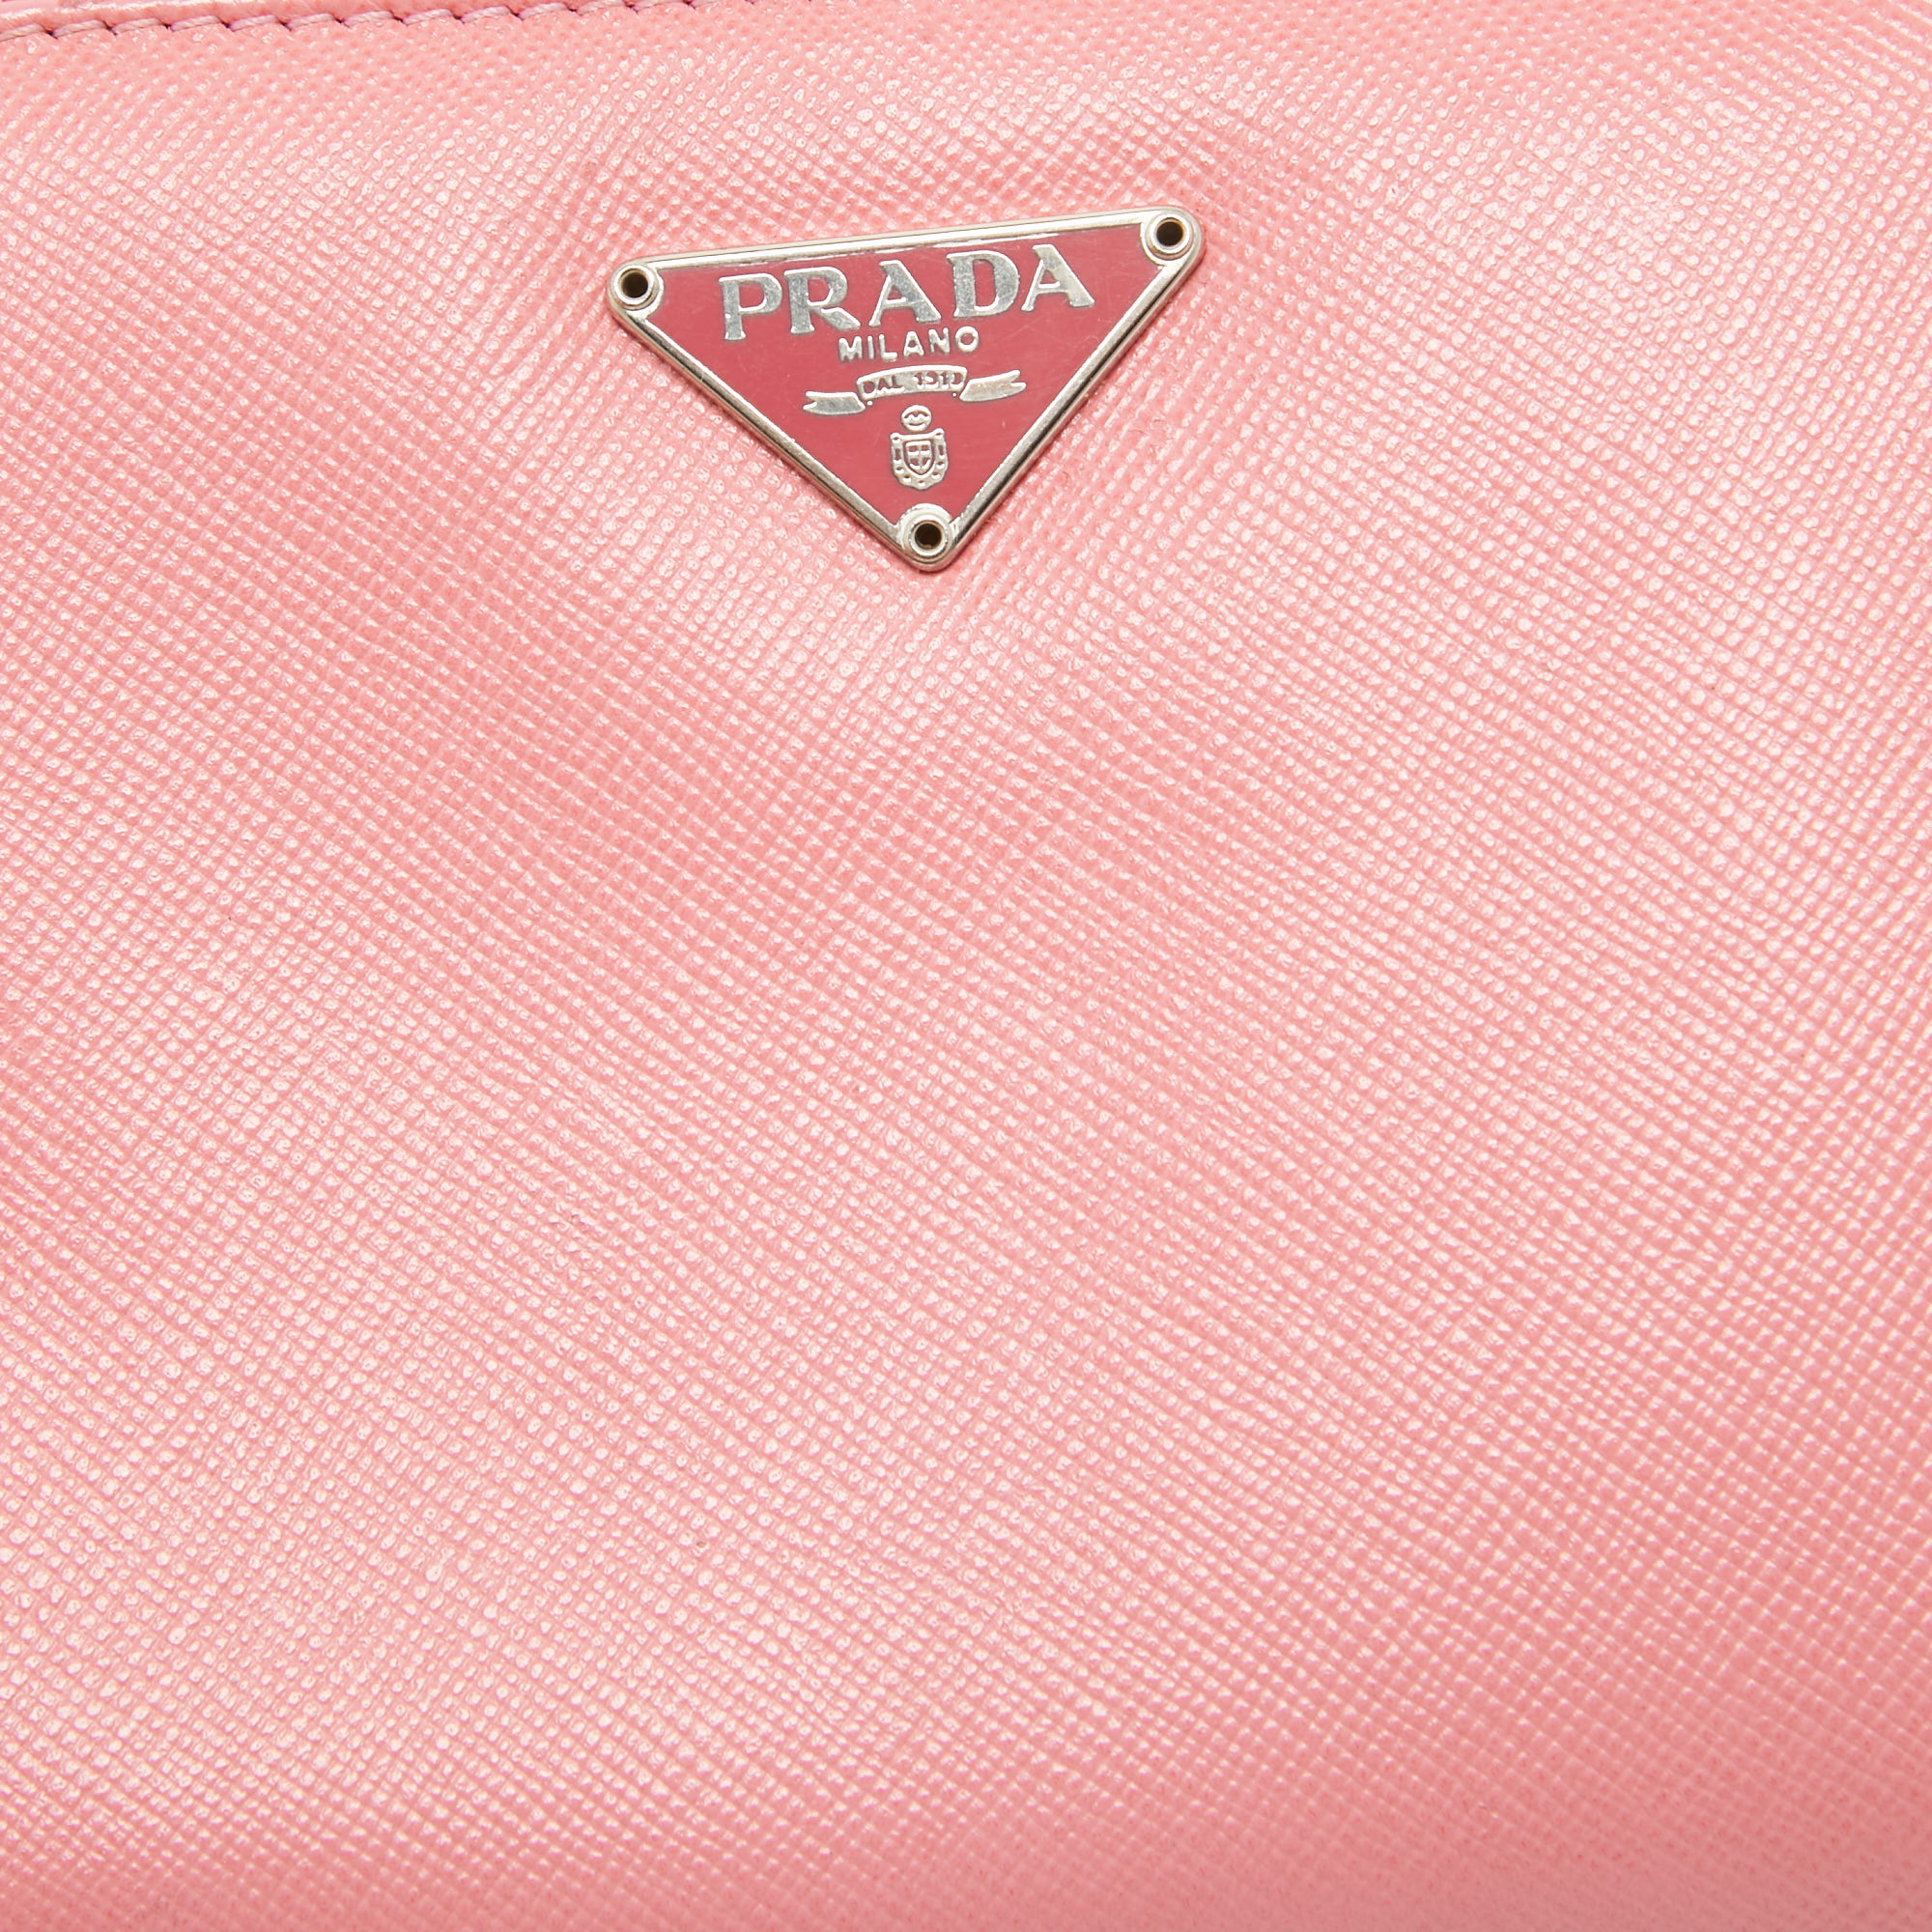 Prada Pink Saffiano Leather Zip French Wallet